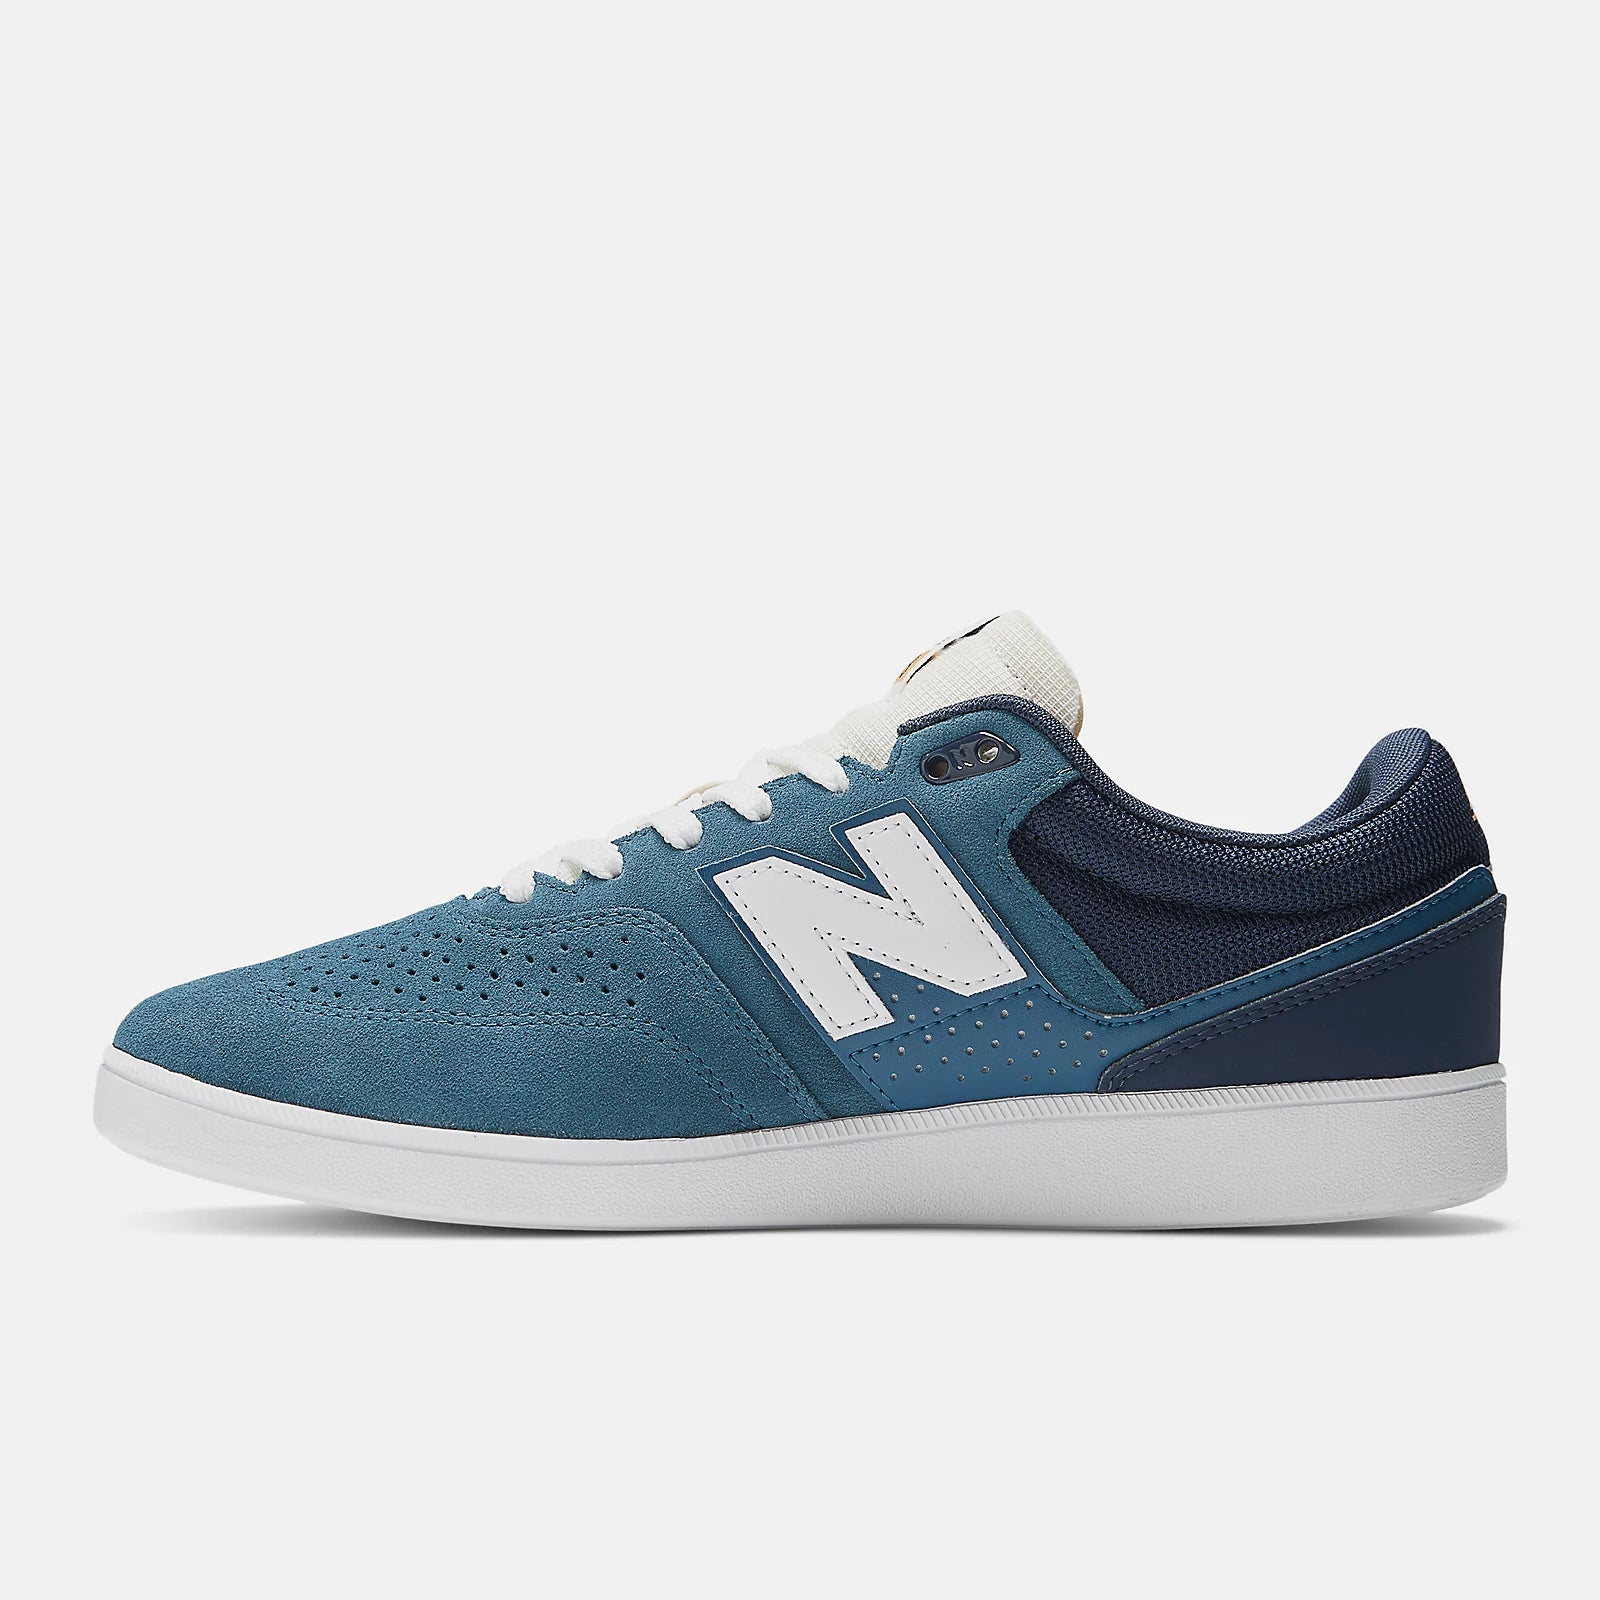 New Balance Numeric Westgate NM508 - Teal/Navy